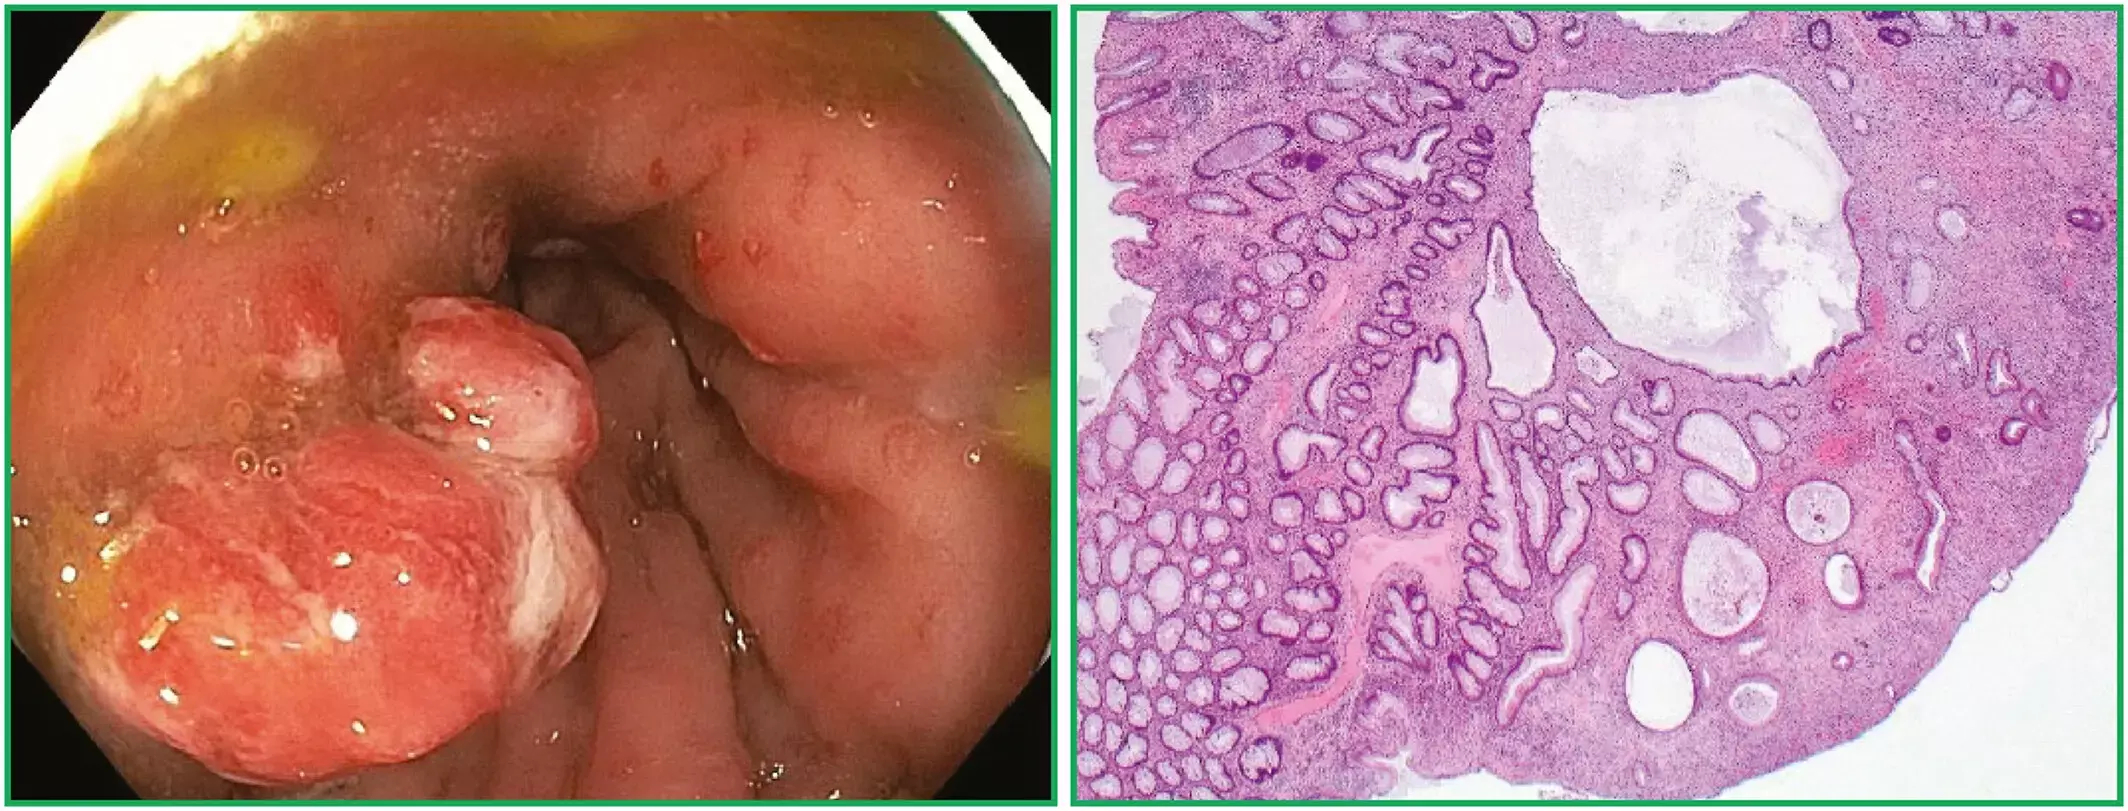 Solitary Juvenile Polyps carry very low risk of malignant transformation